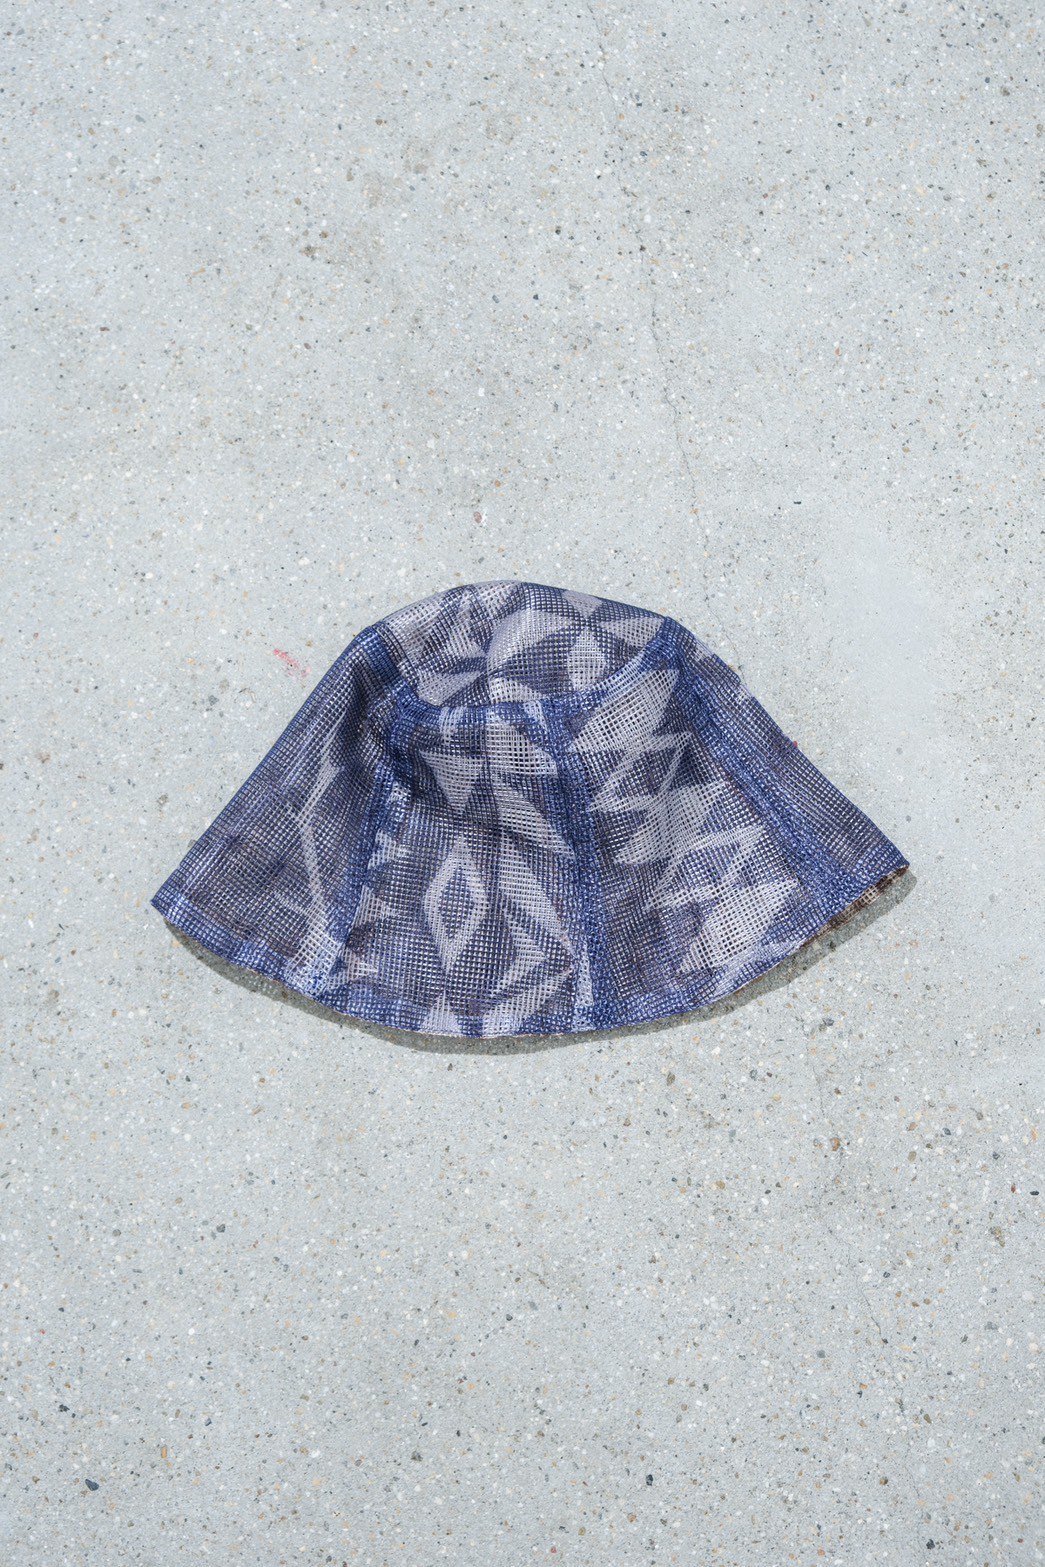 SOUTH2 WEST8 / Reversible Tulip Hat - Heavyweight Mesh